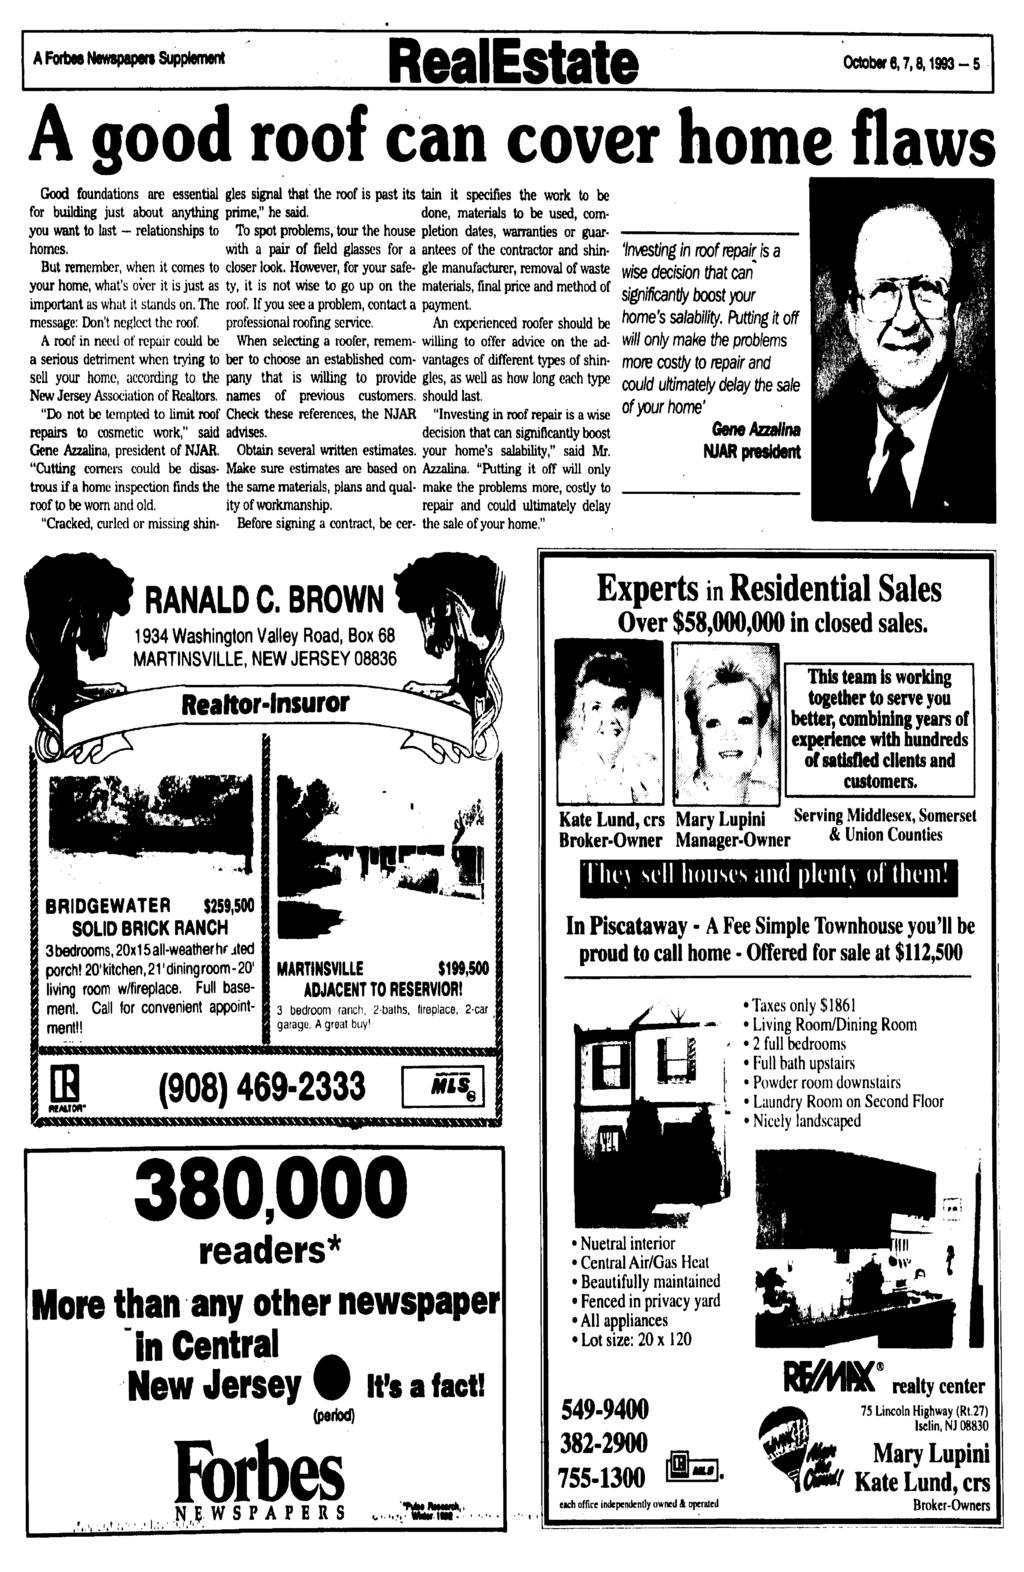 A Forbas Newspapers Supplement RealEstate October 6,7,8,1993-5 A good roof can cover home flaws Good foundations are essential for building just about anything you want to last - relationships to